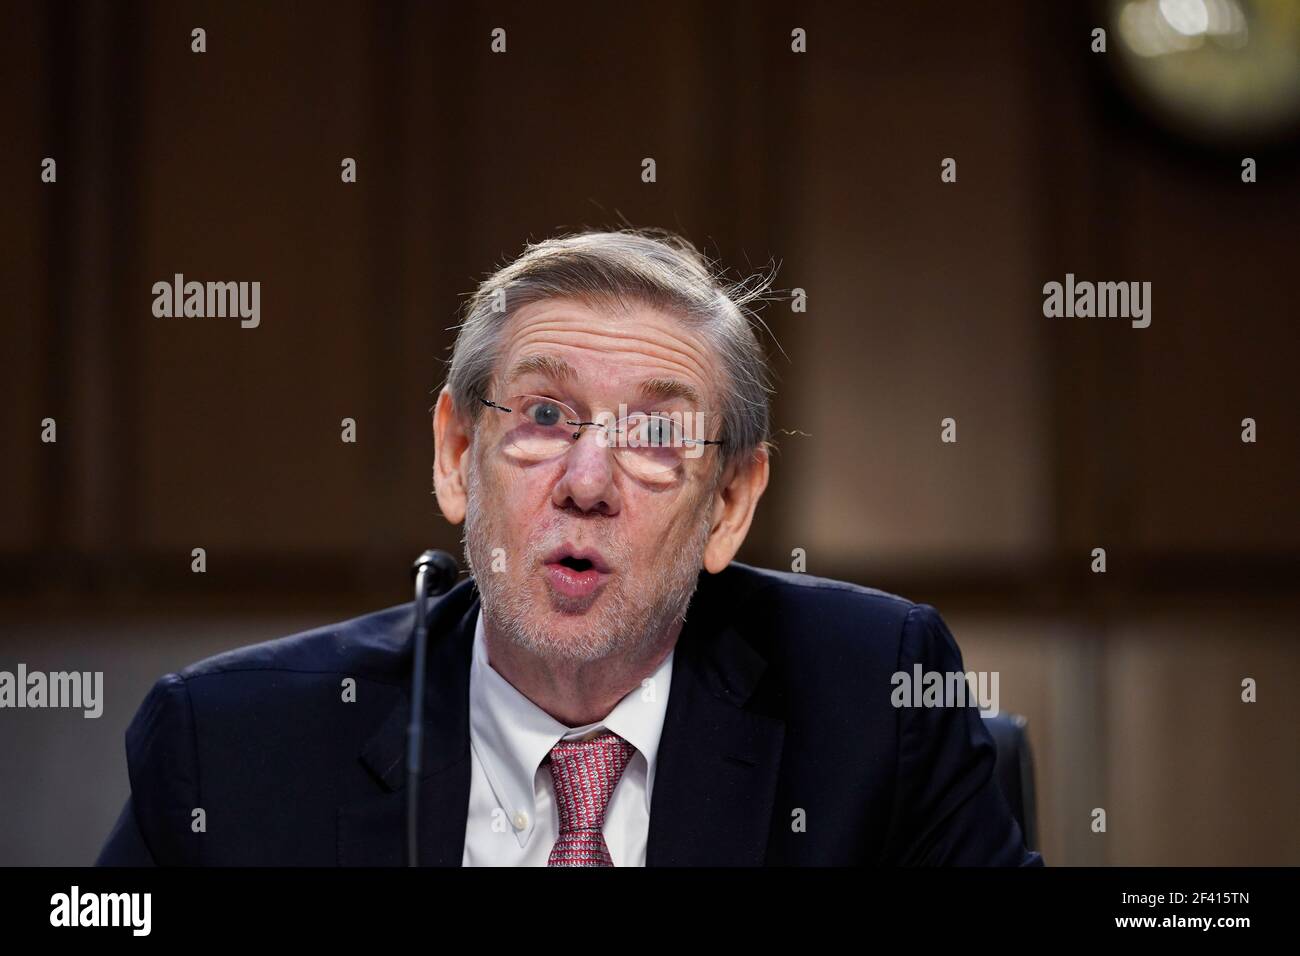 Washington, USA. 18th Mar, 2021. Dr. David Kessler, Chief Science Officer of the White House COVID-19 response team, testifies during a Senate Health, Education, Labor and Pensions Committee hearing on the federal coronavirus response on Capitol Hill in Washington, Thursday, March 18, 2021. (Photo by Susan Walsh/Pool/Sipa USA) Credit: Sipa USA/Alamy Live News Stock Photo